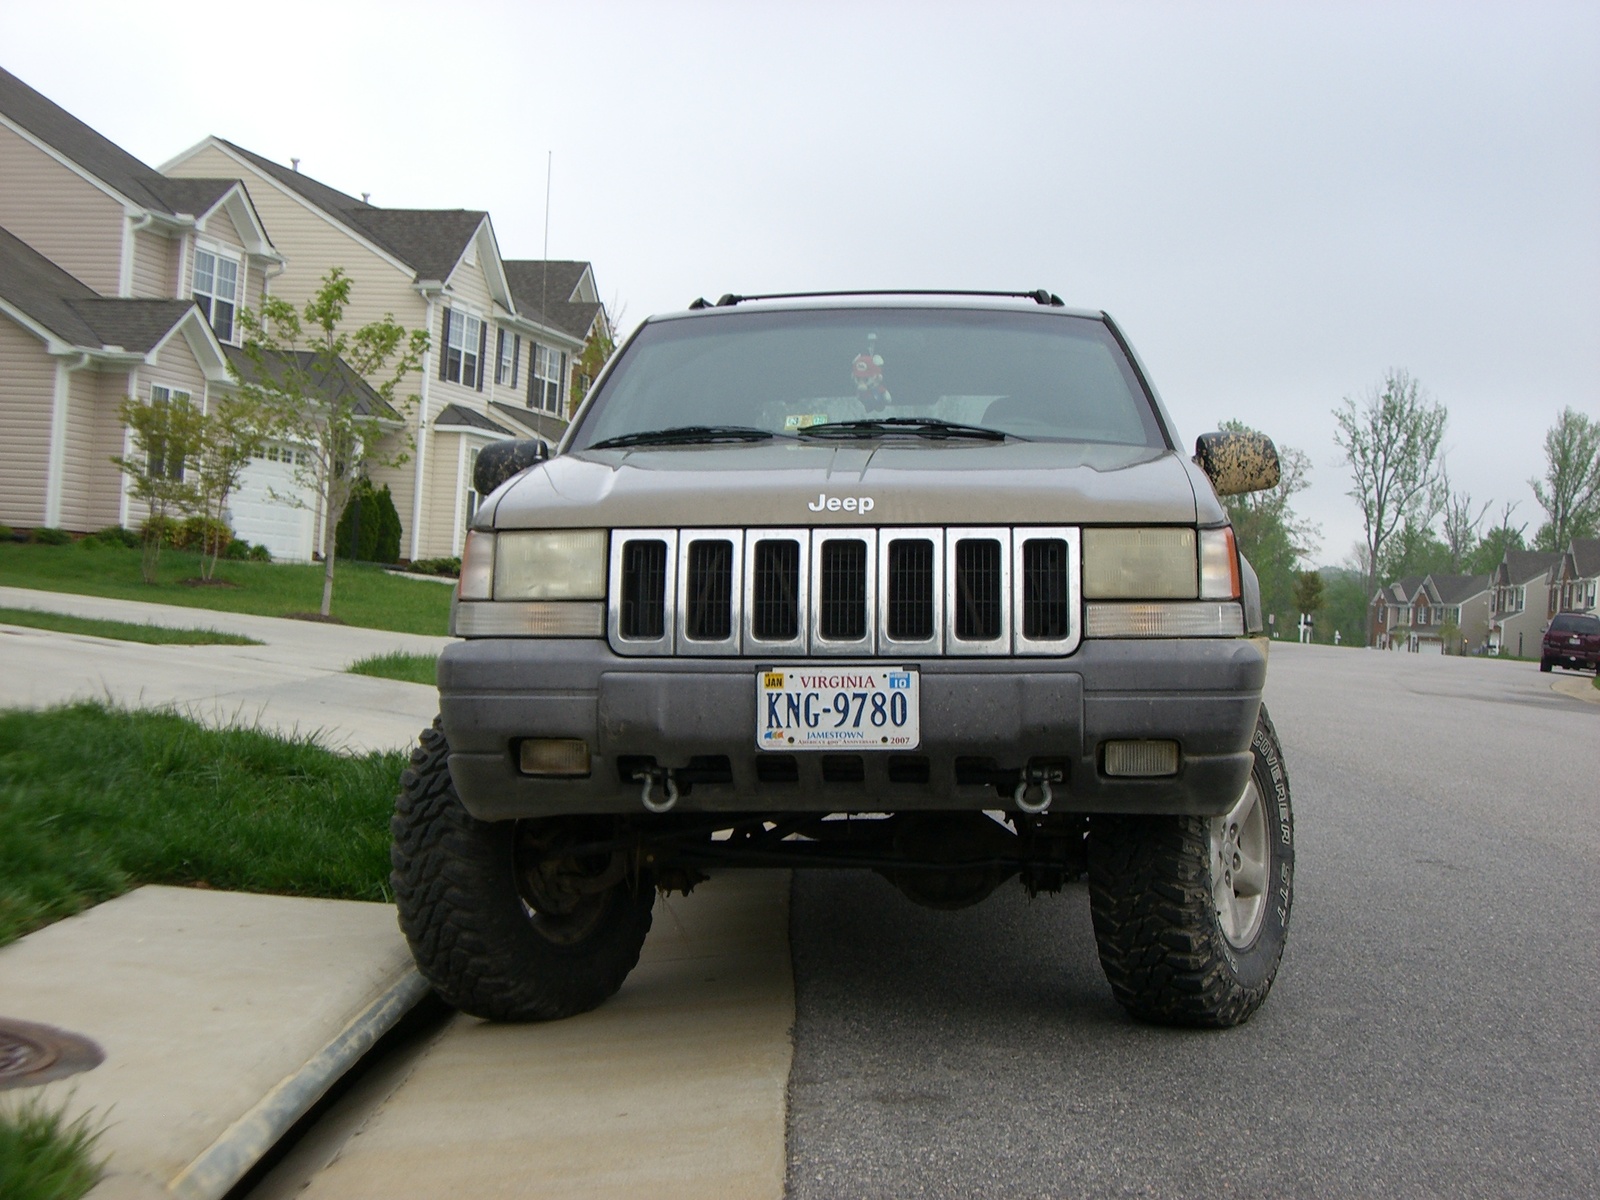 1995 Jeep grand cherokee owners manual free download